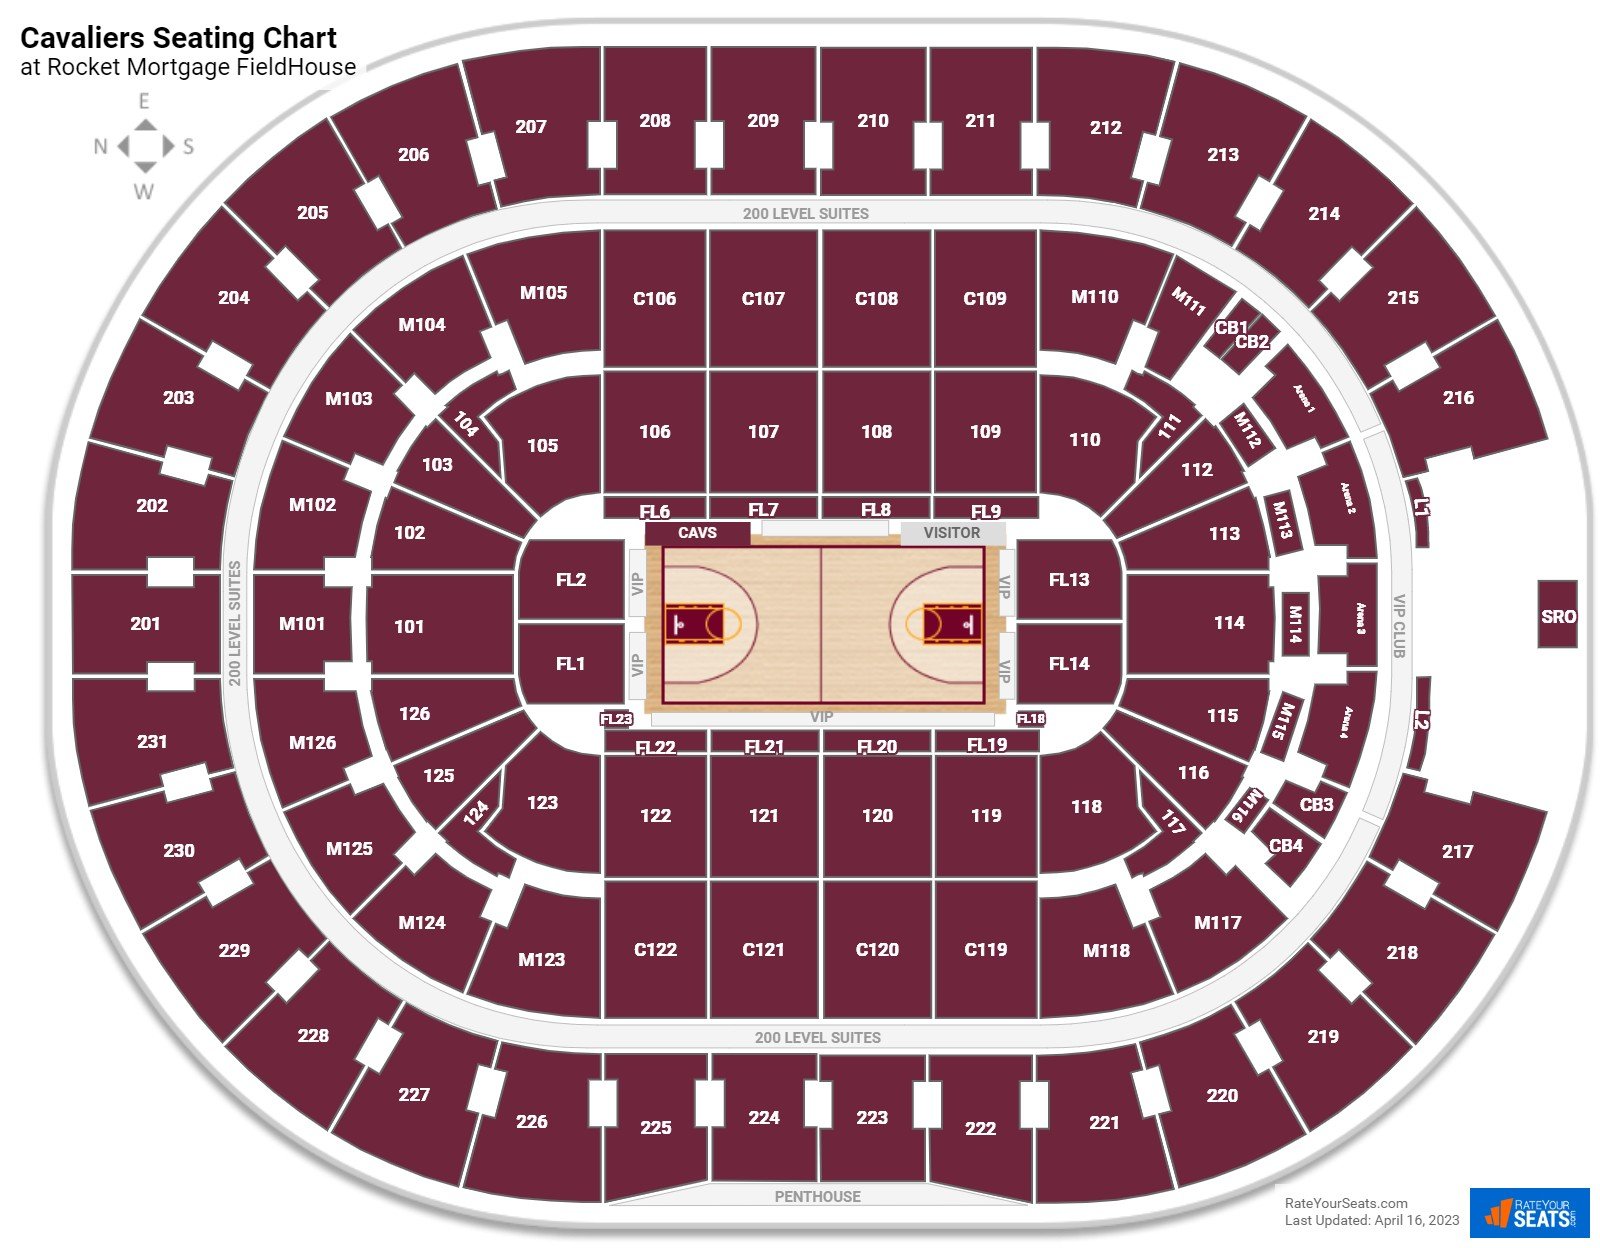 Cleveland Cavaliers Seating Chart at Rocket Mortgage FieldHouse